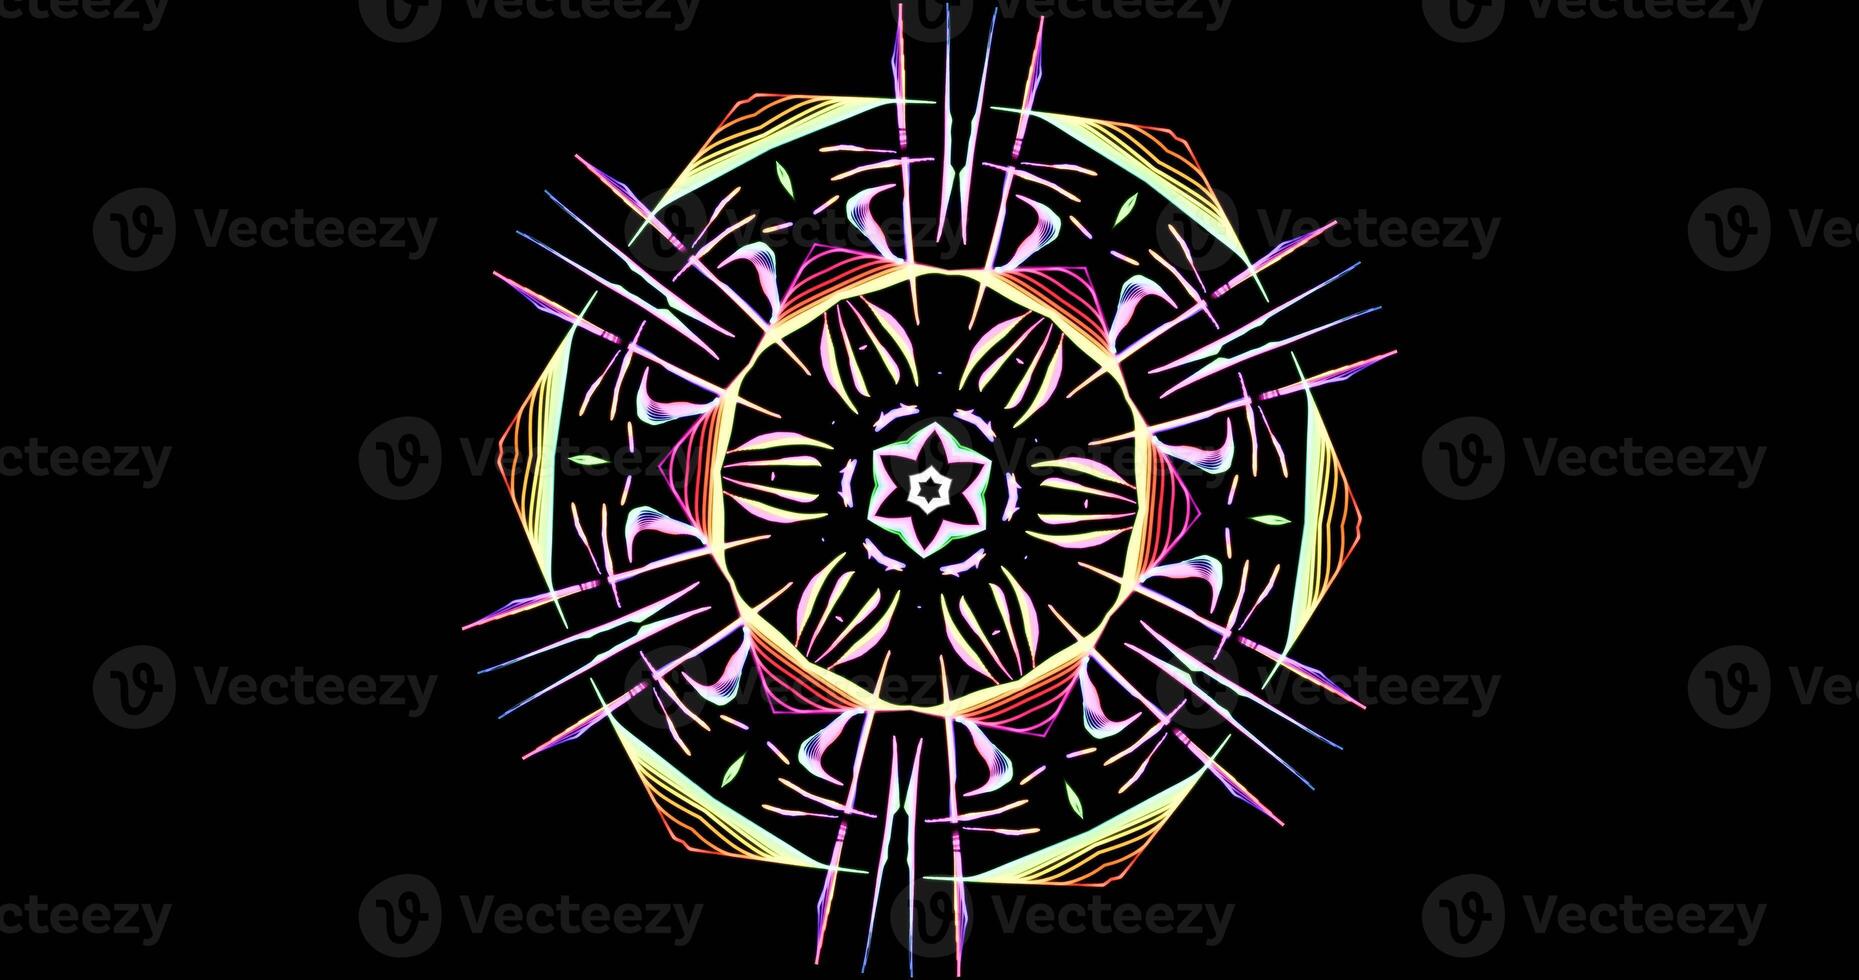 Kaleidoscopic Pattern On Dark Background In Vibrant Colors photo